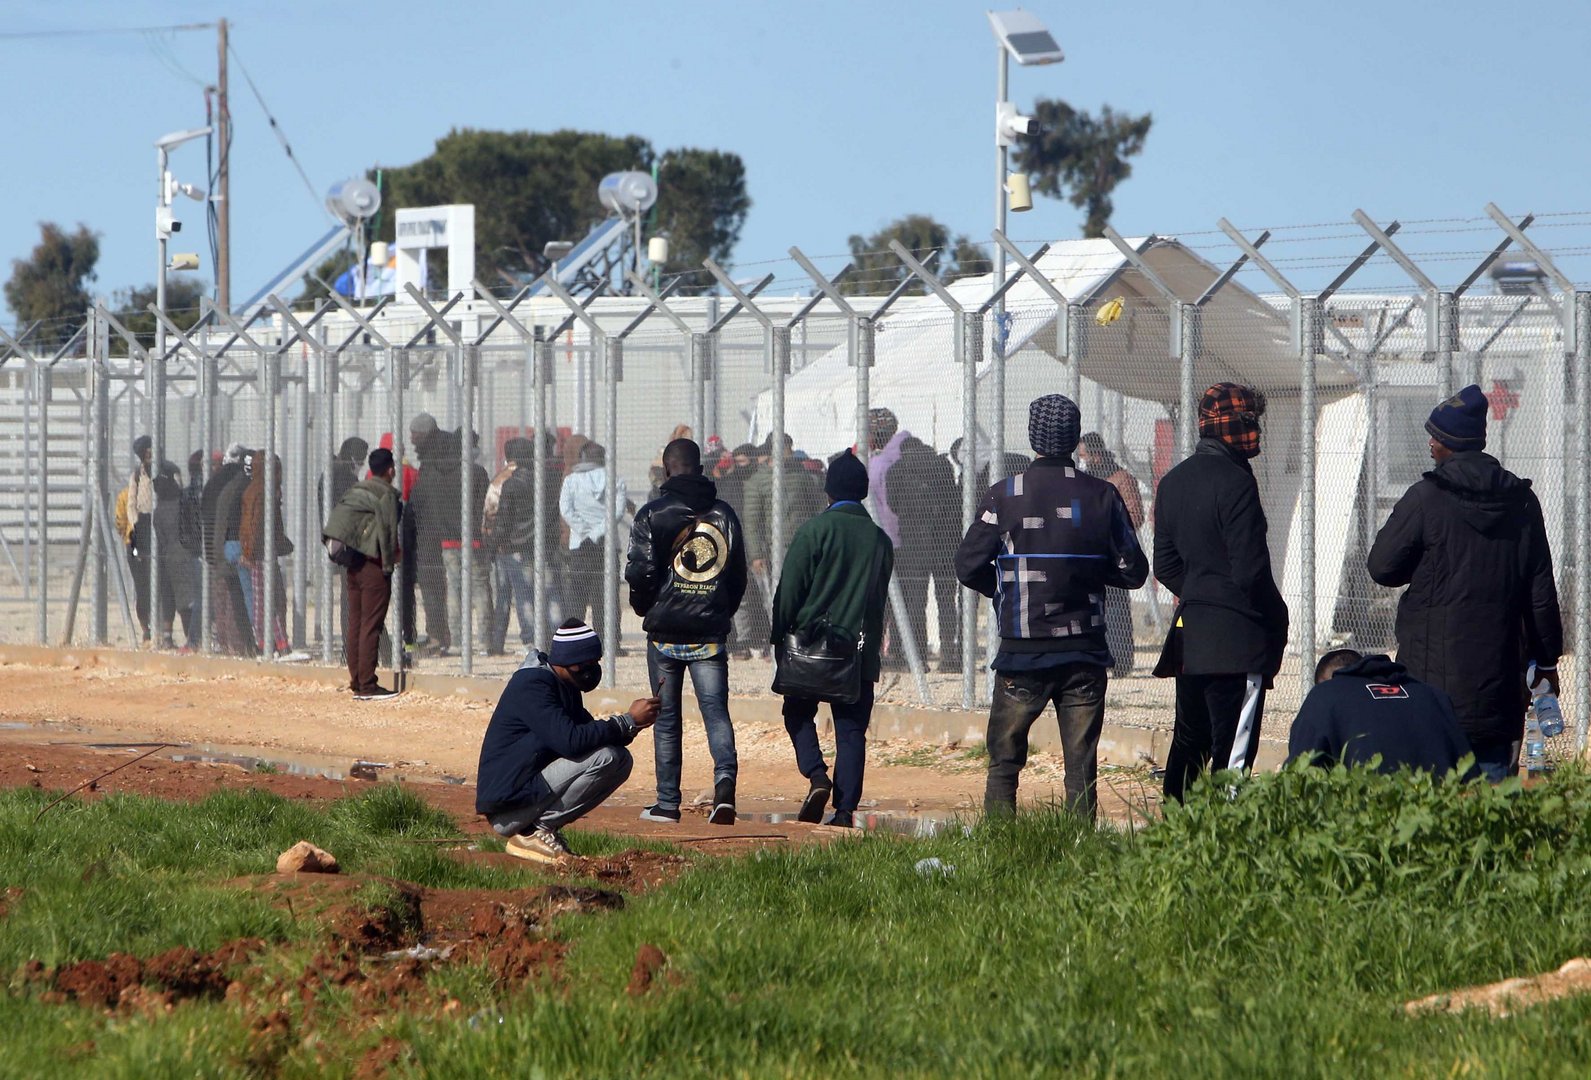 image ‘Inhuman and degrading treatment of migrants in Cyprus’